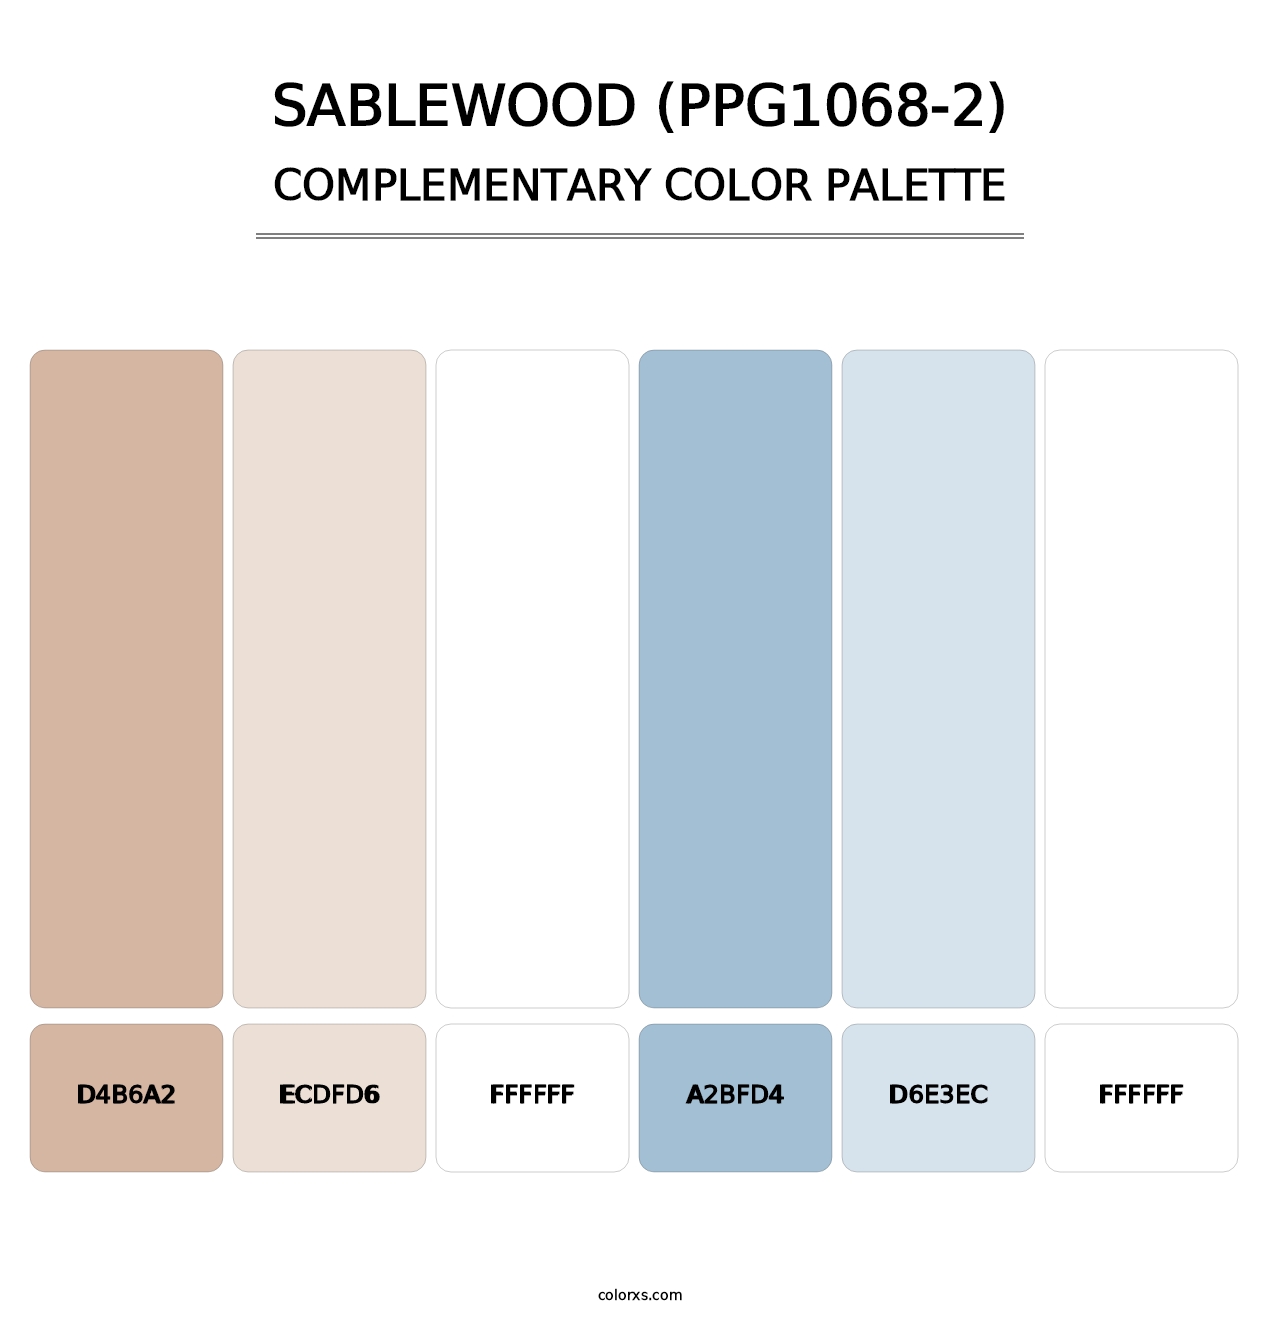 Sablewood (PPG1068-2) - Complementary Color Palette